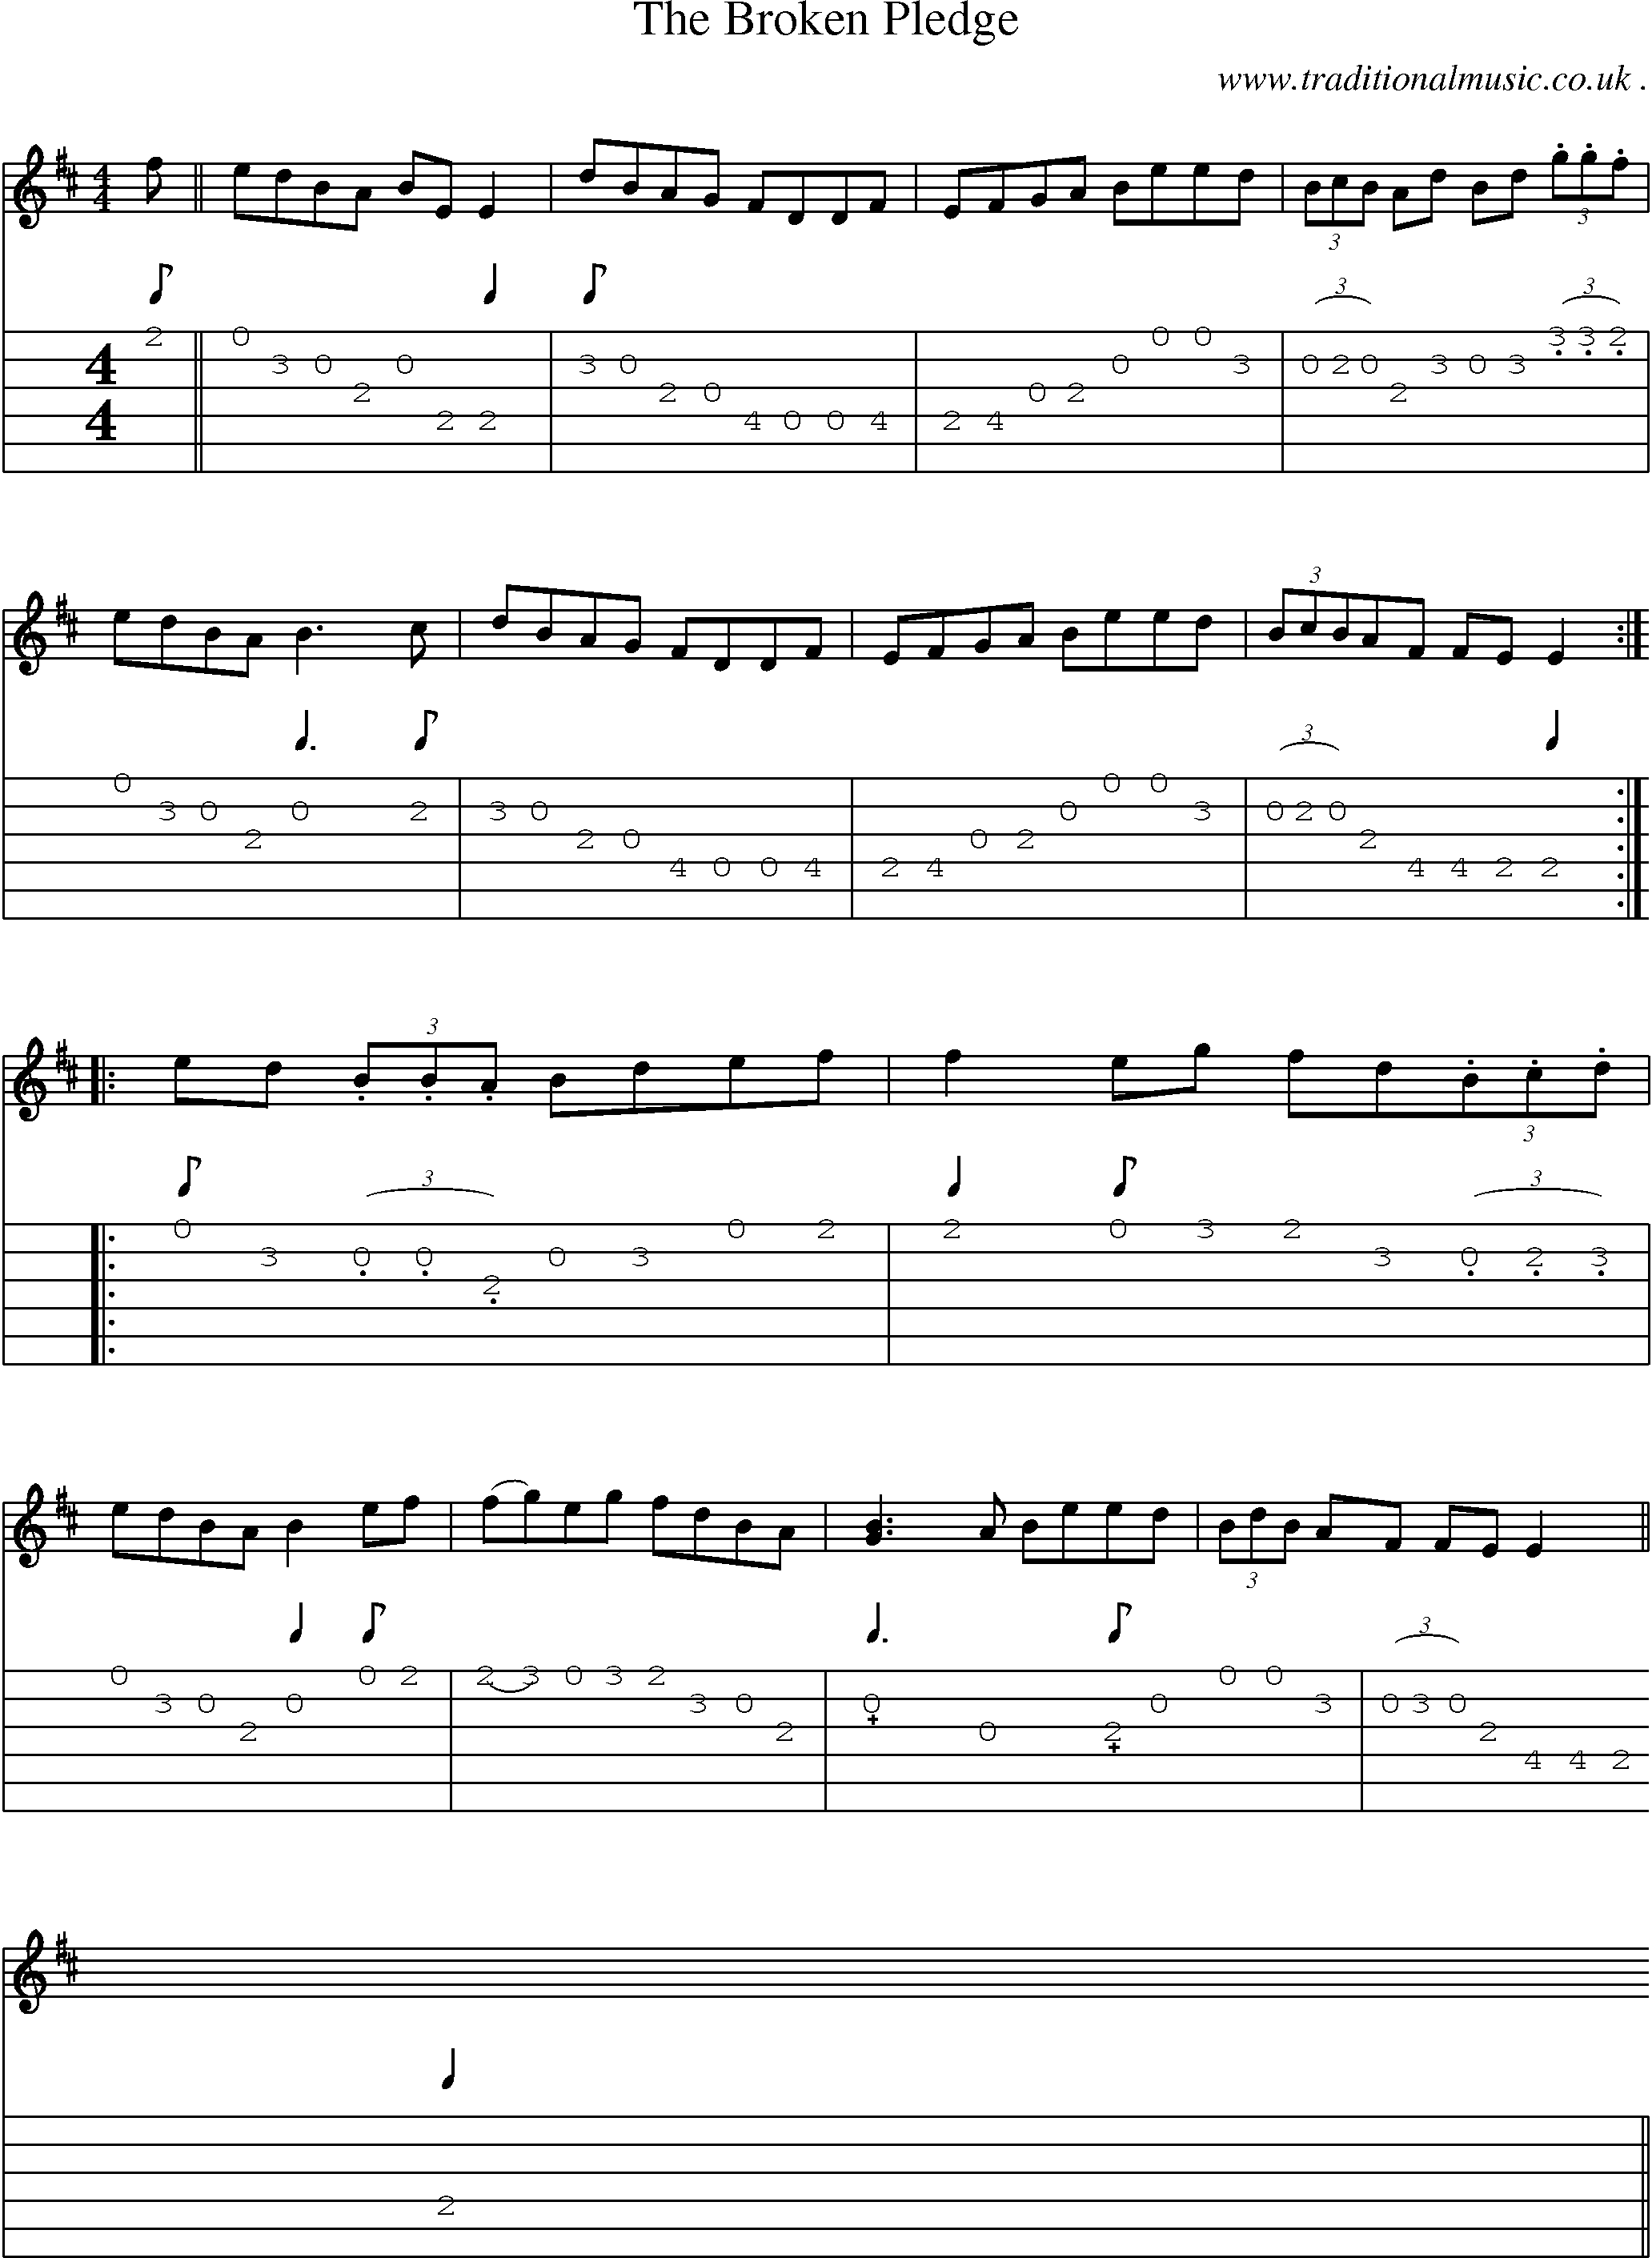 Sheet-Music and Guitar Tabs for The Broken Pledge